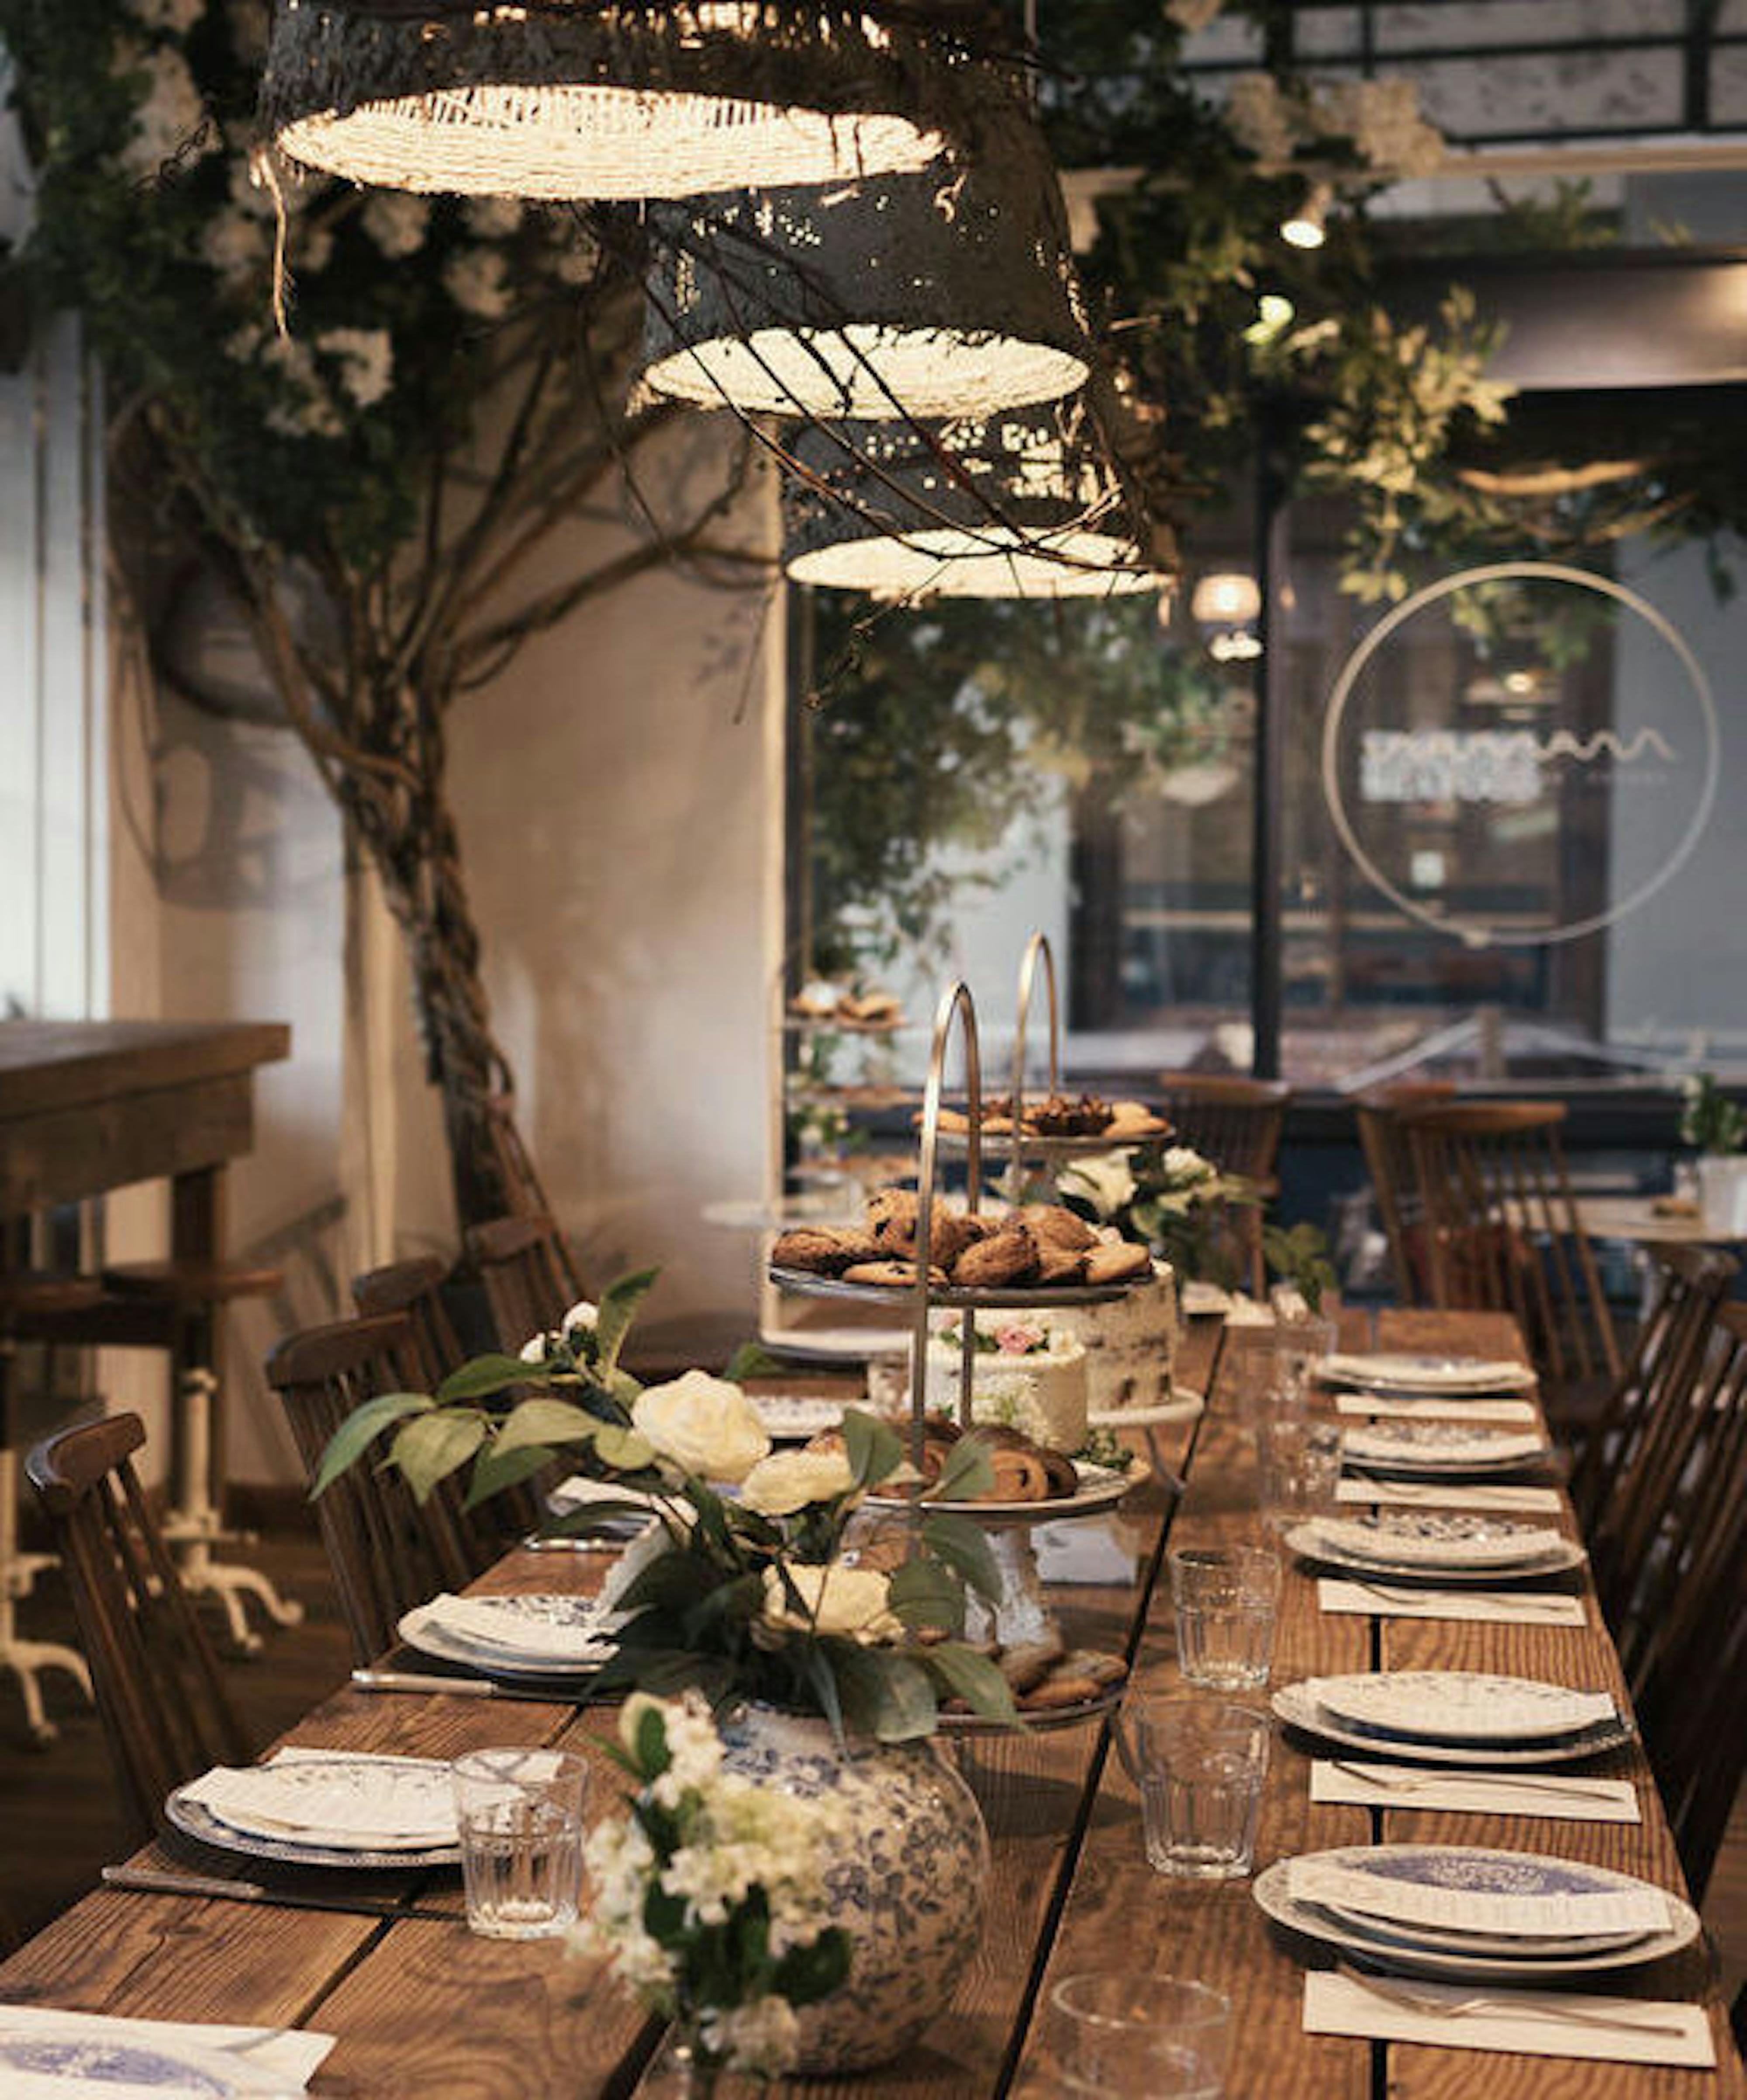 communal table with place settings and dessert on tiered stands